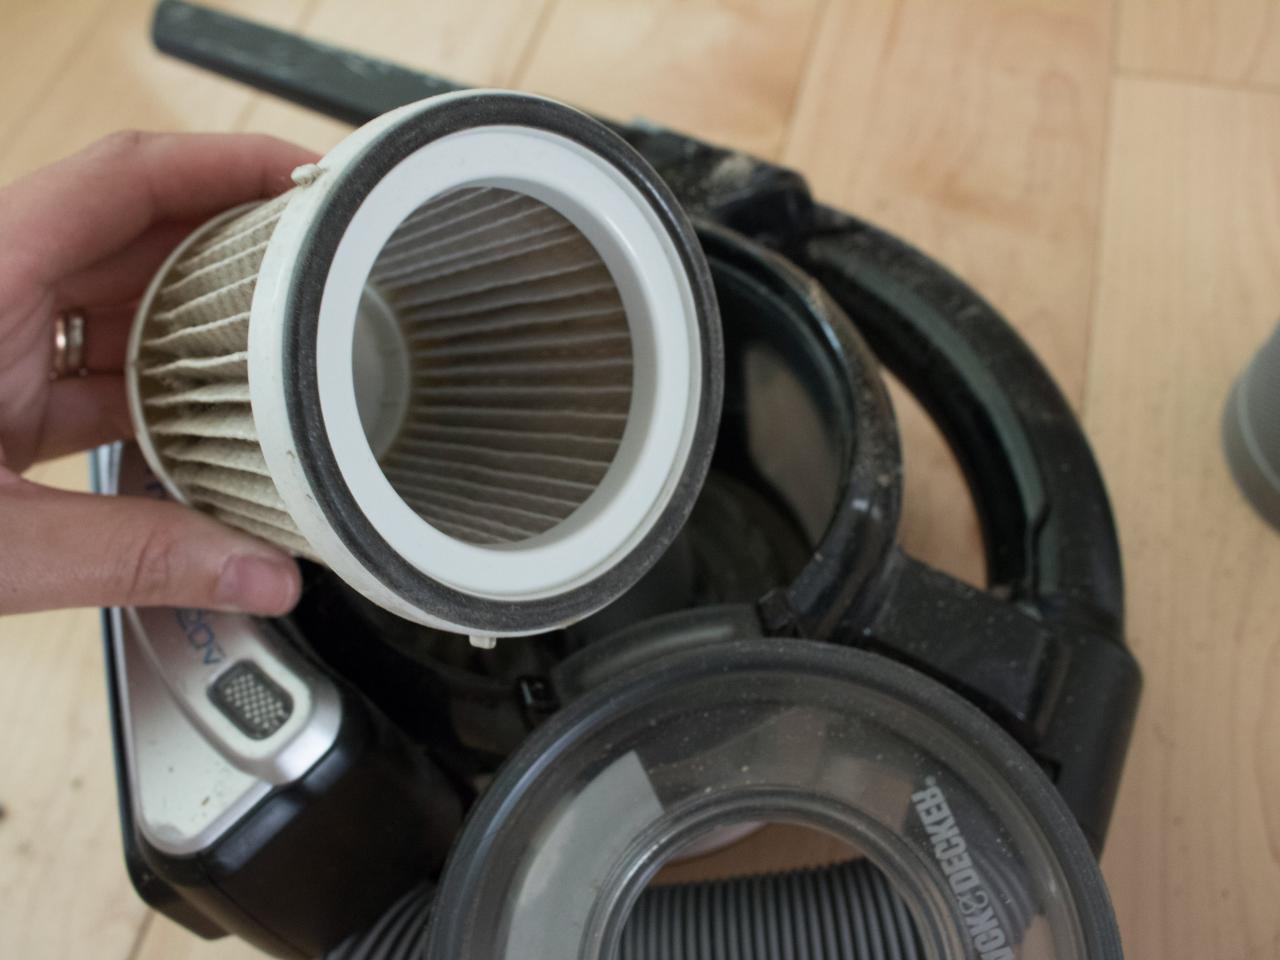 How to Fix a Vacuum That Lost Suction